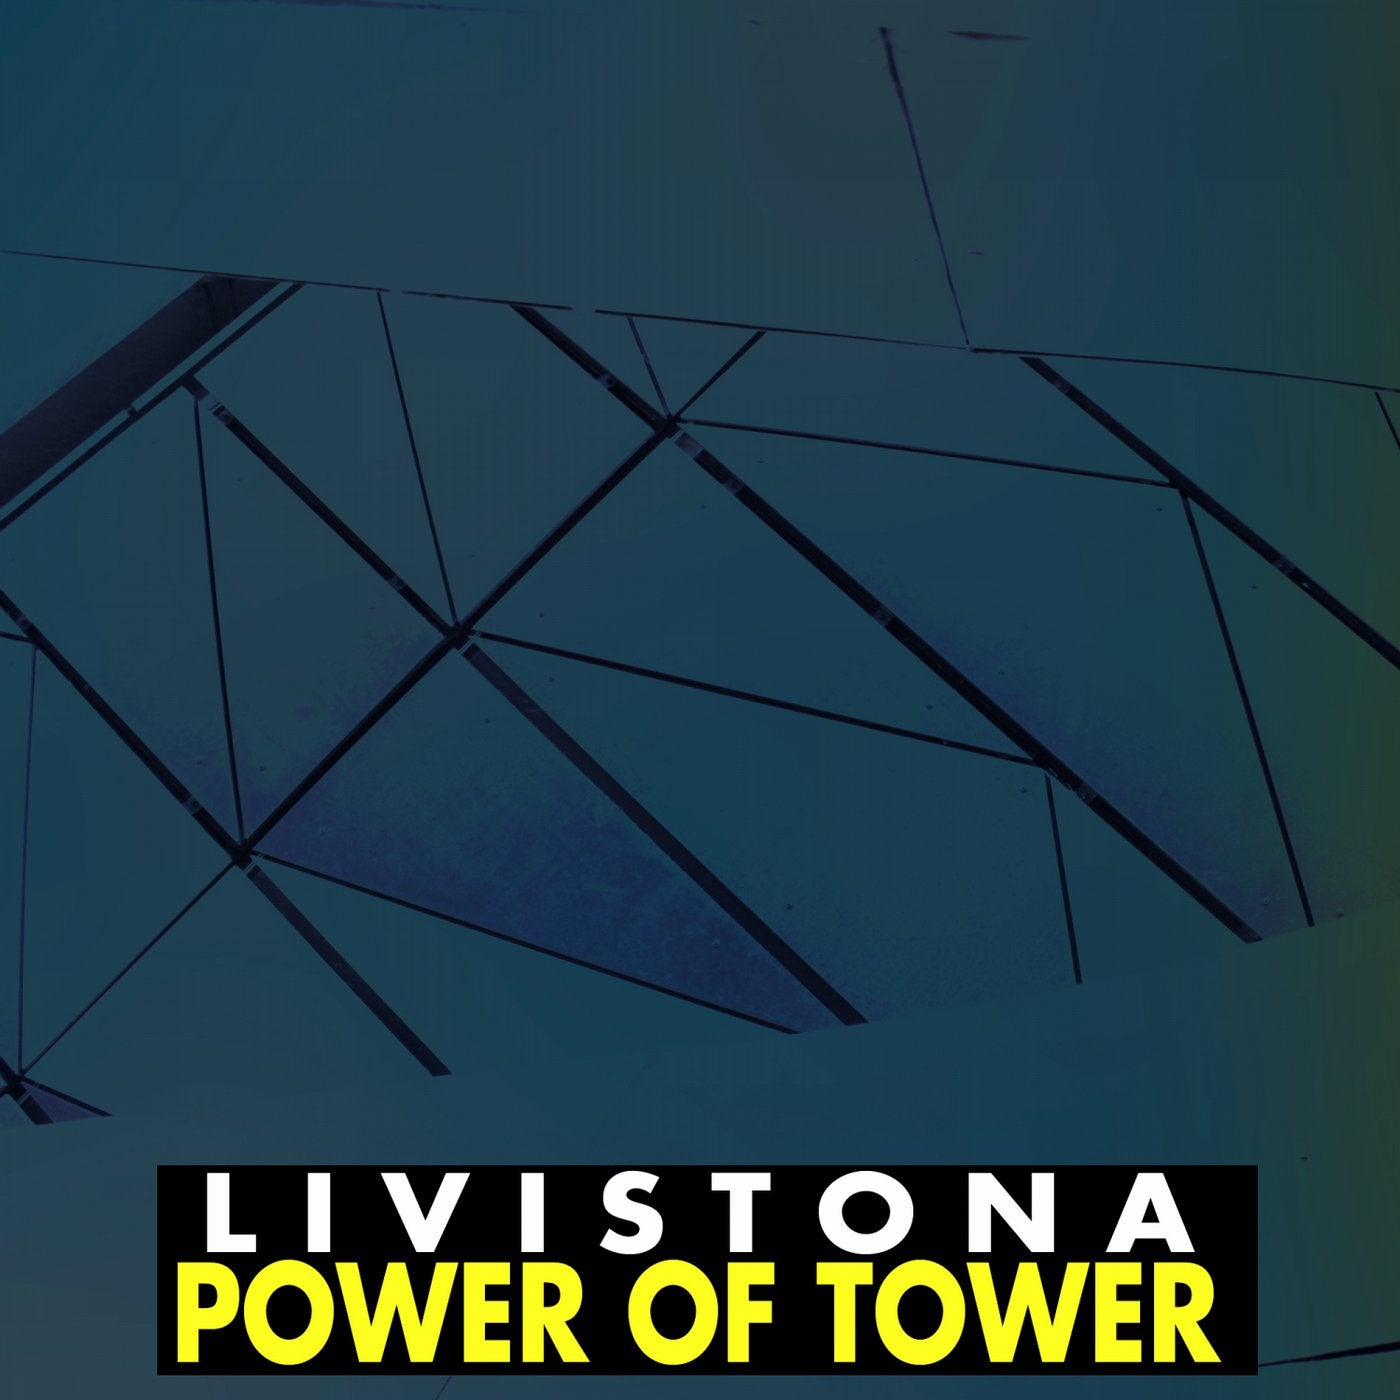 Power Of Tower